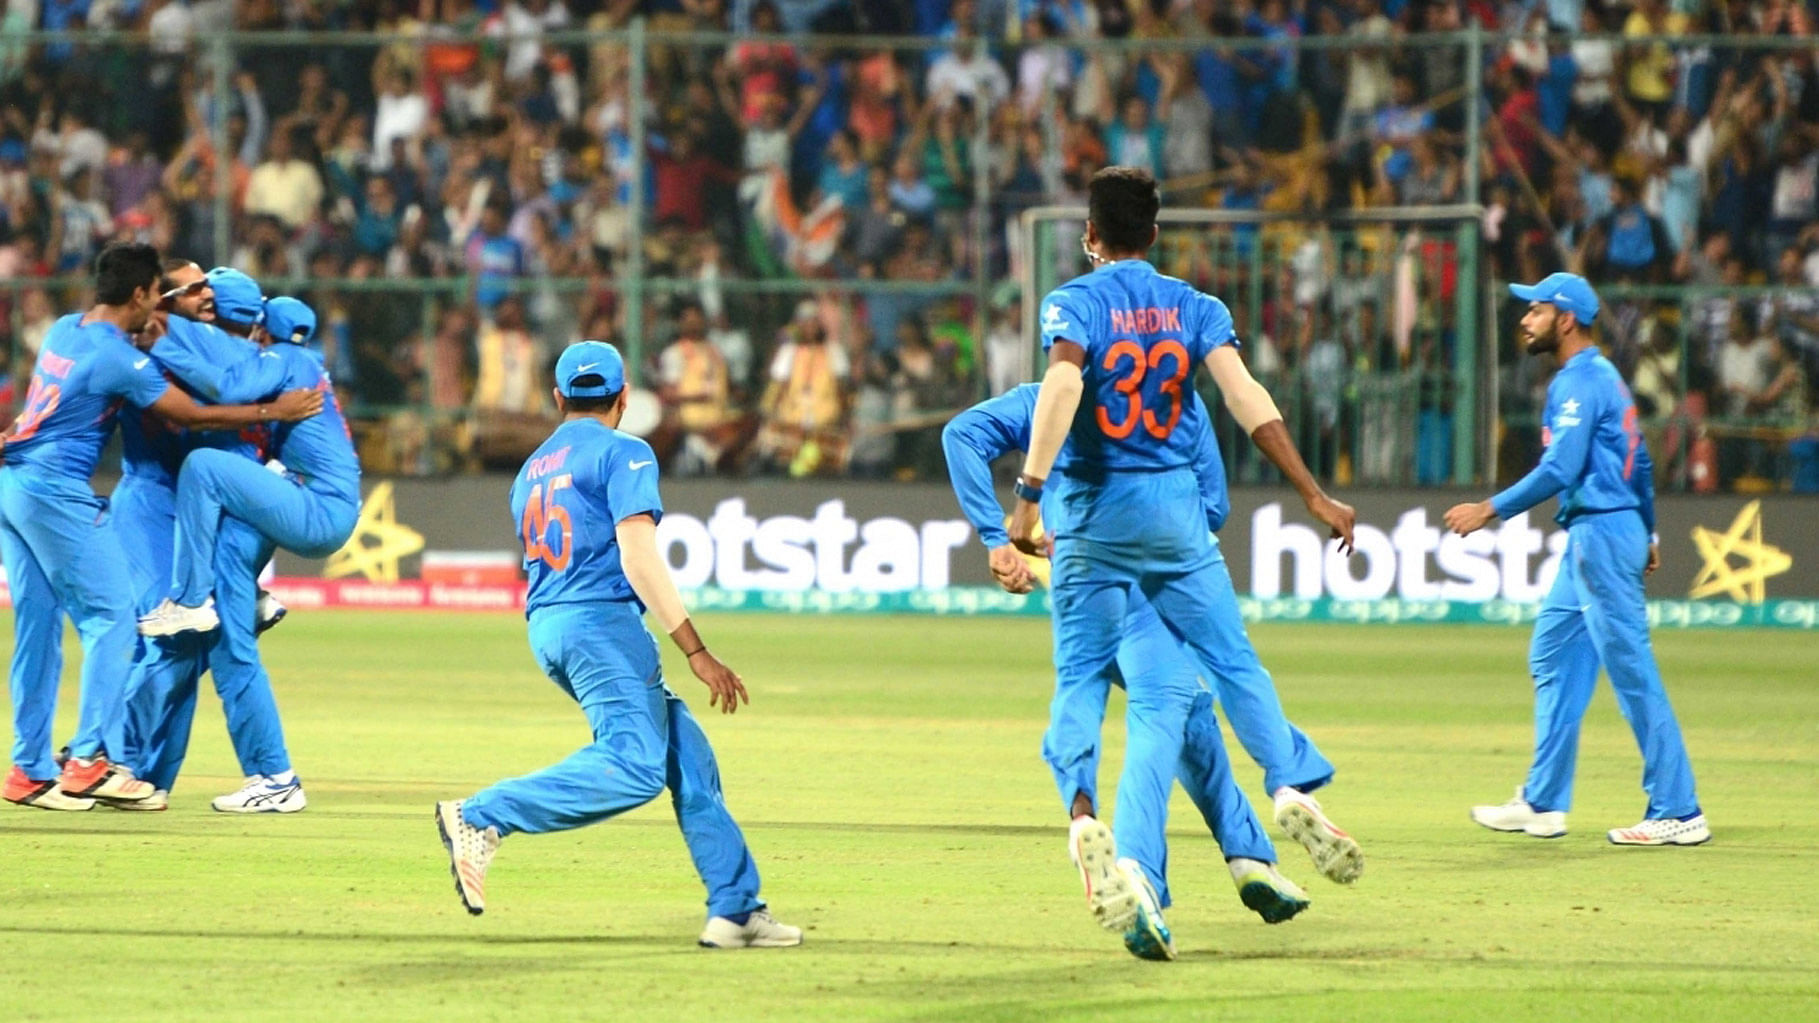 The Indian team celebrates after beating Bangladesh by one run. (Photo: IANS)